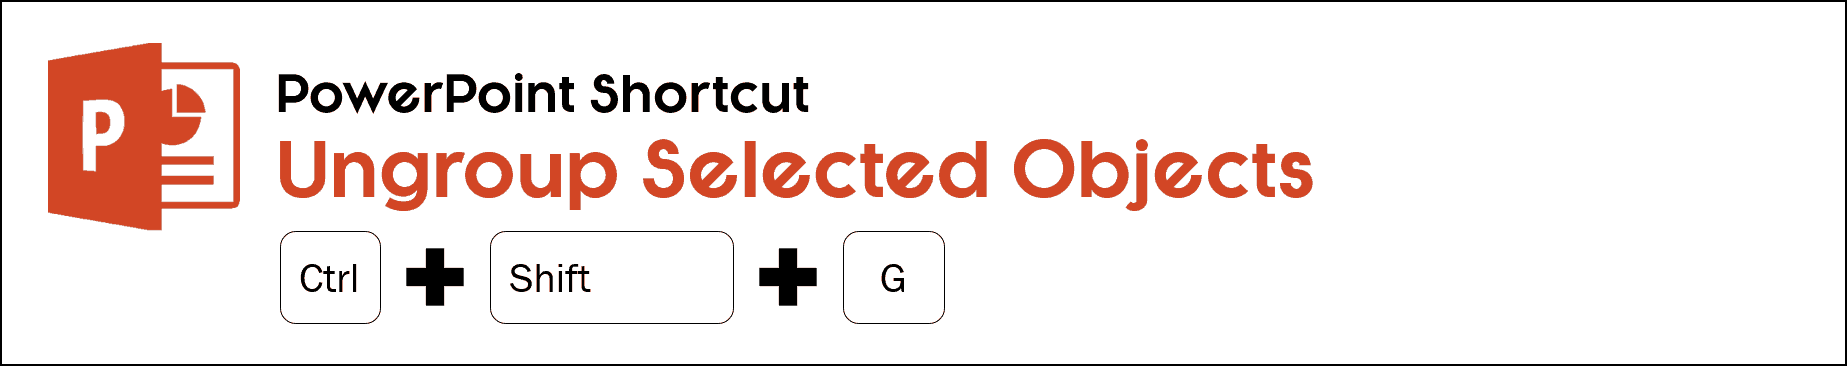 The ungroup shortcut in PowerPoint is control plus shift plus g on your keyboard